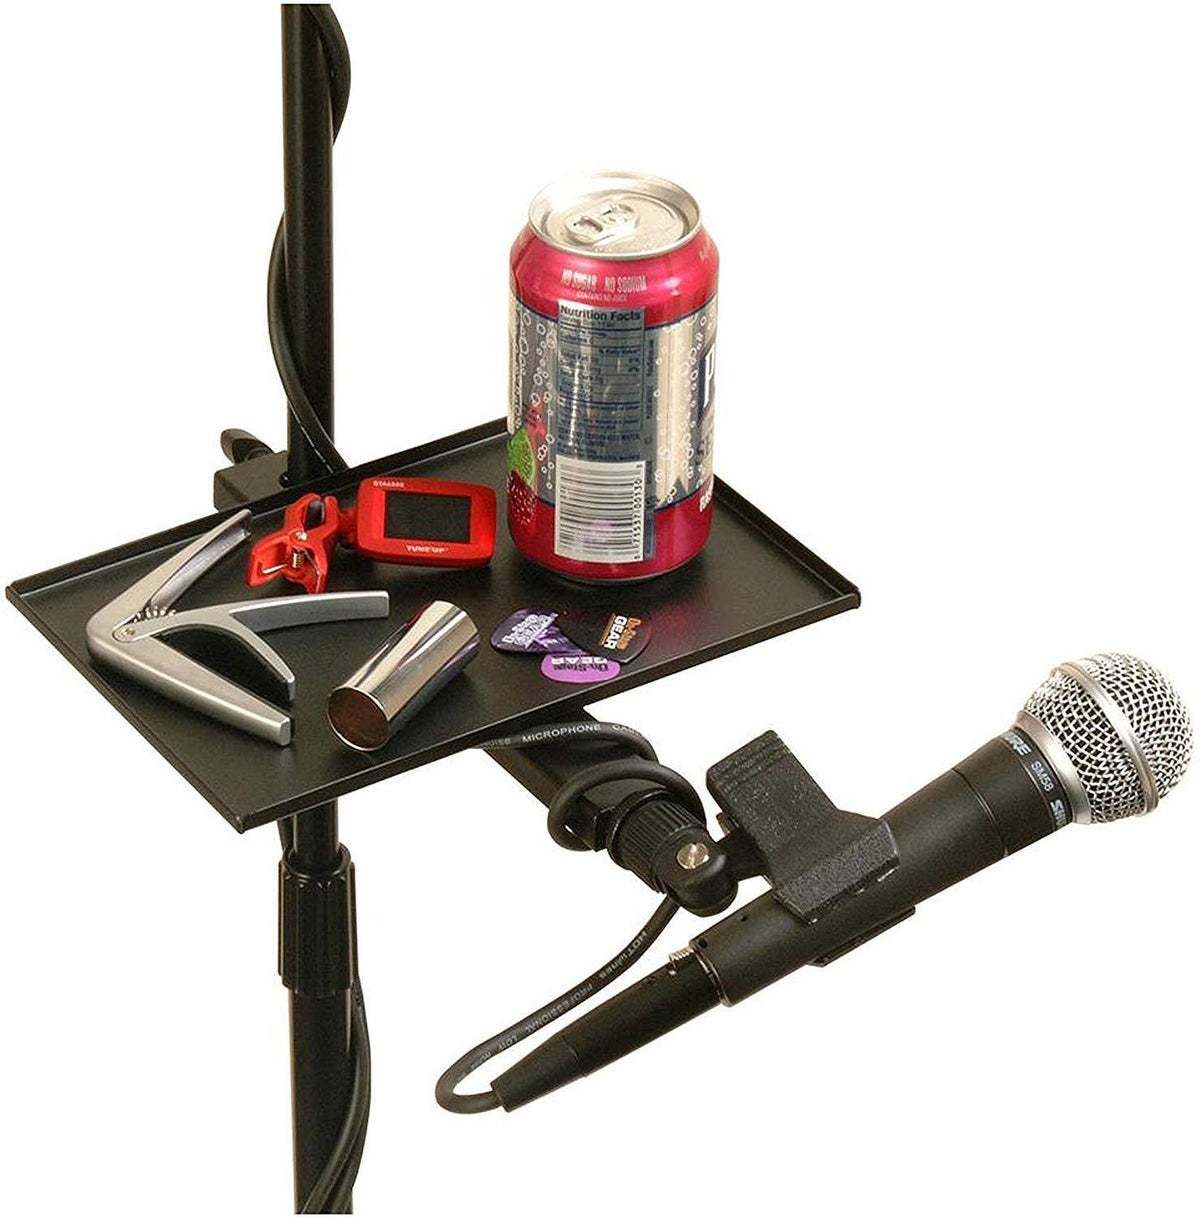 On-Stage Stands U-mount Mic Stand Tray